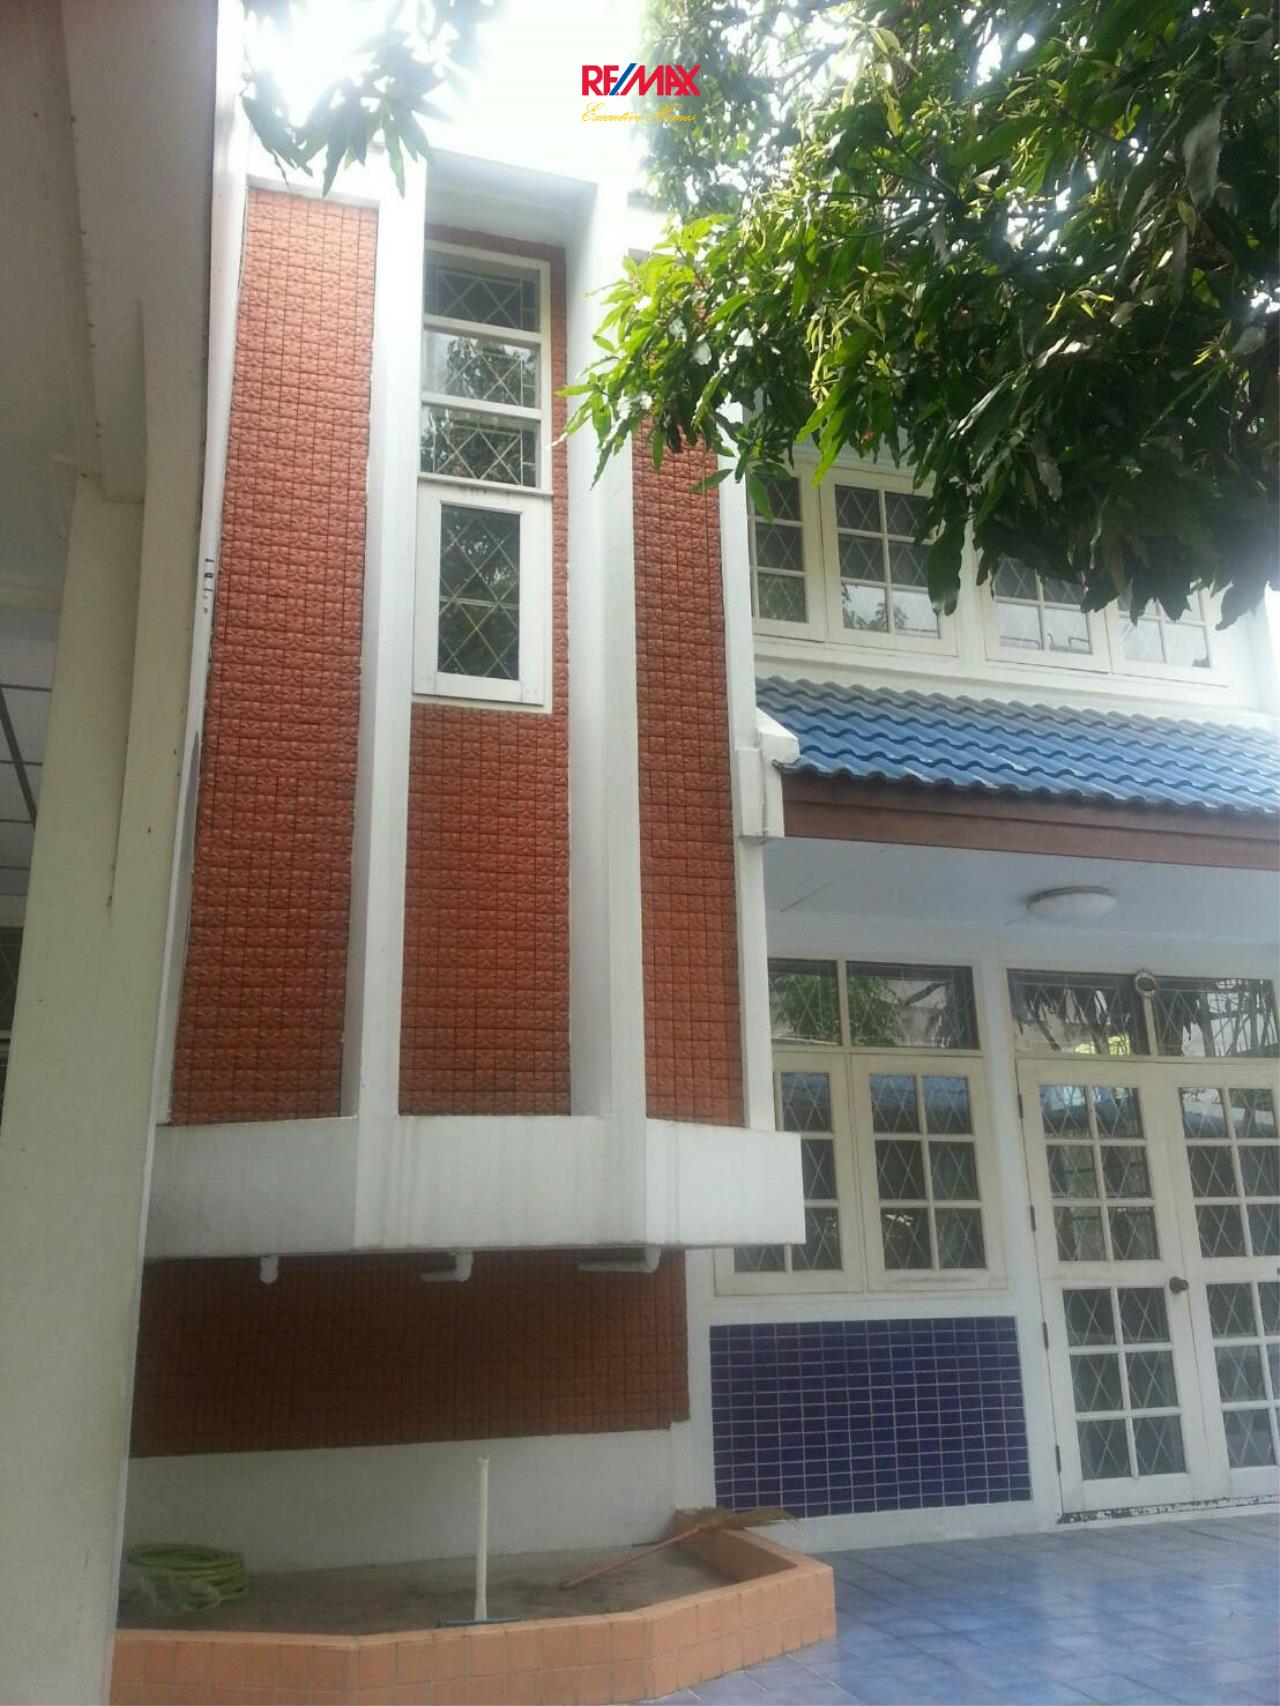 RE/MAX Executive Homes Agency's Spacious 3 Bedroom House for Rent and Sale BTS Udom Suk 3